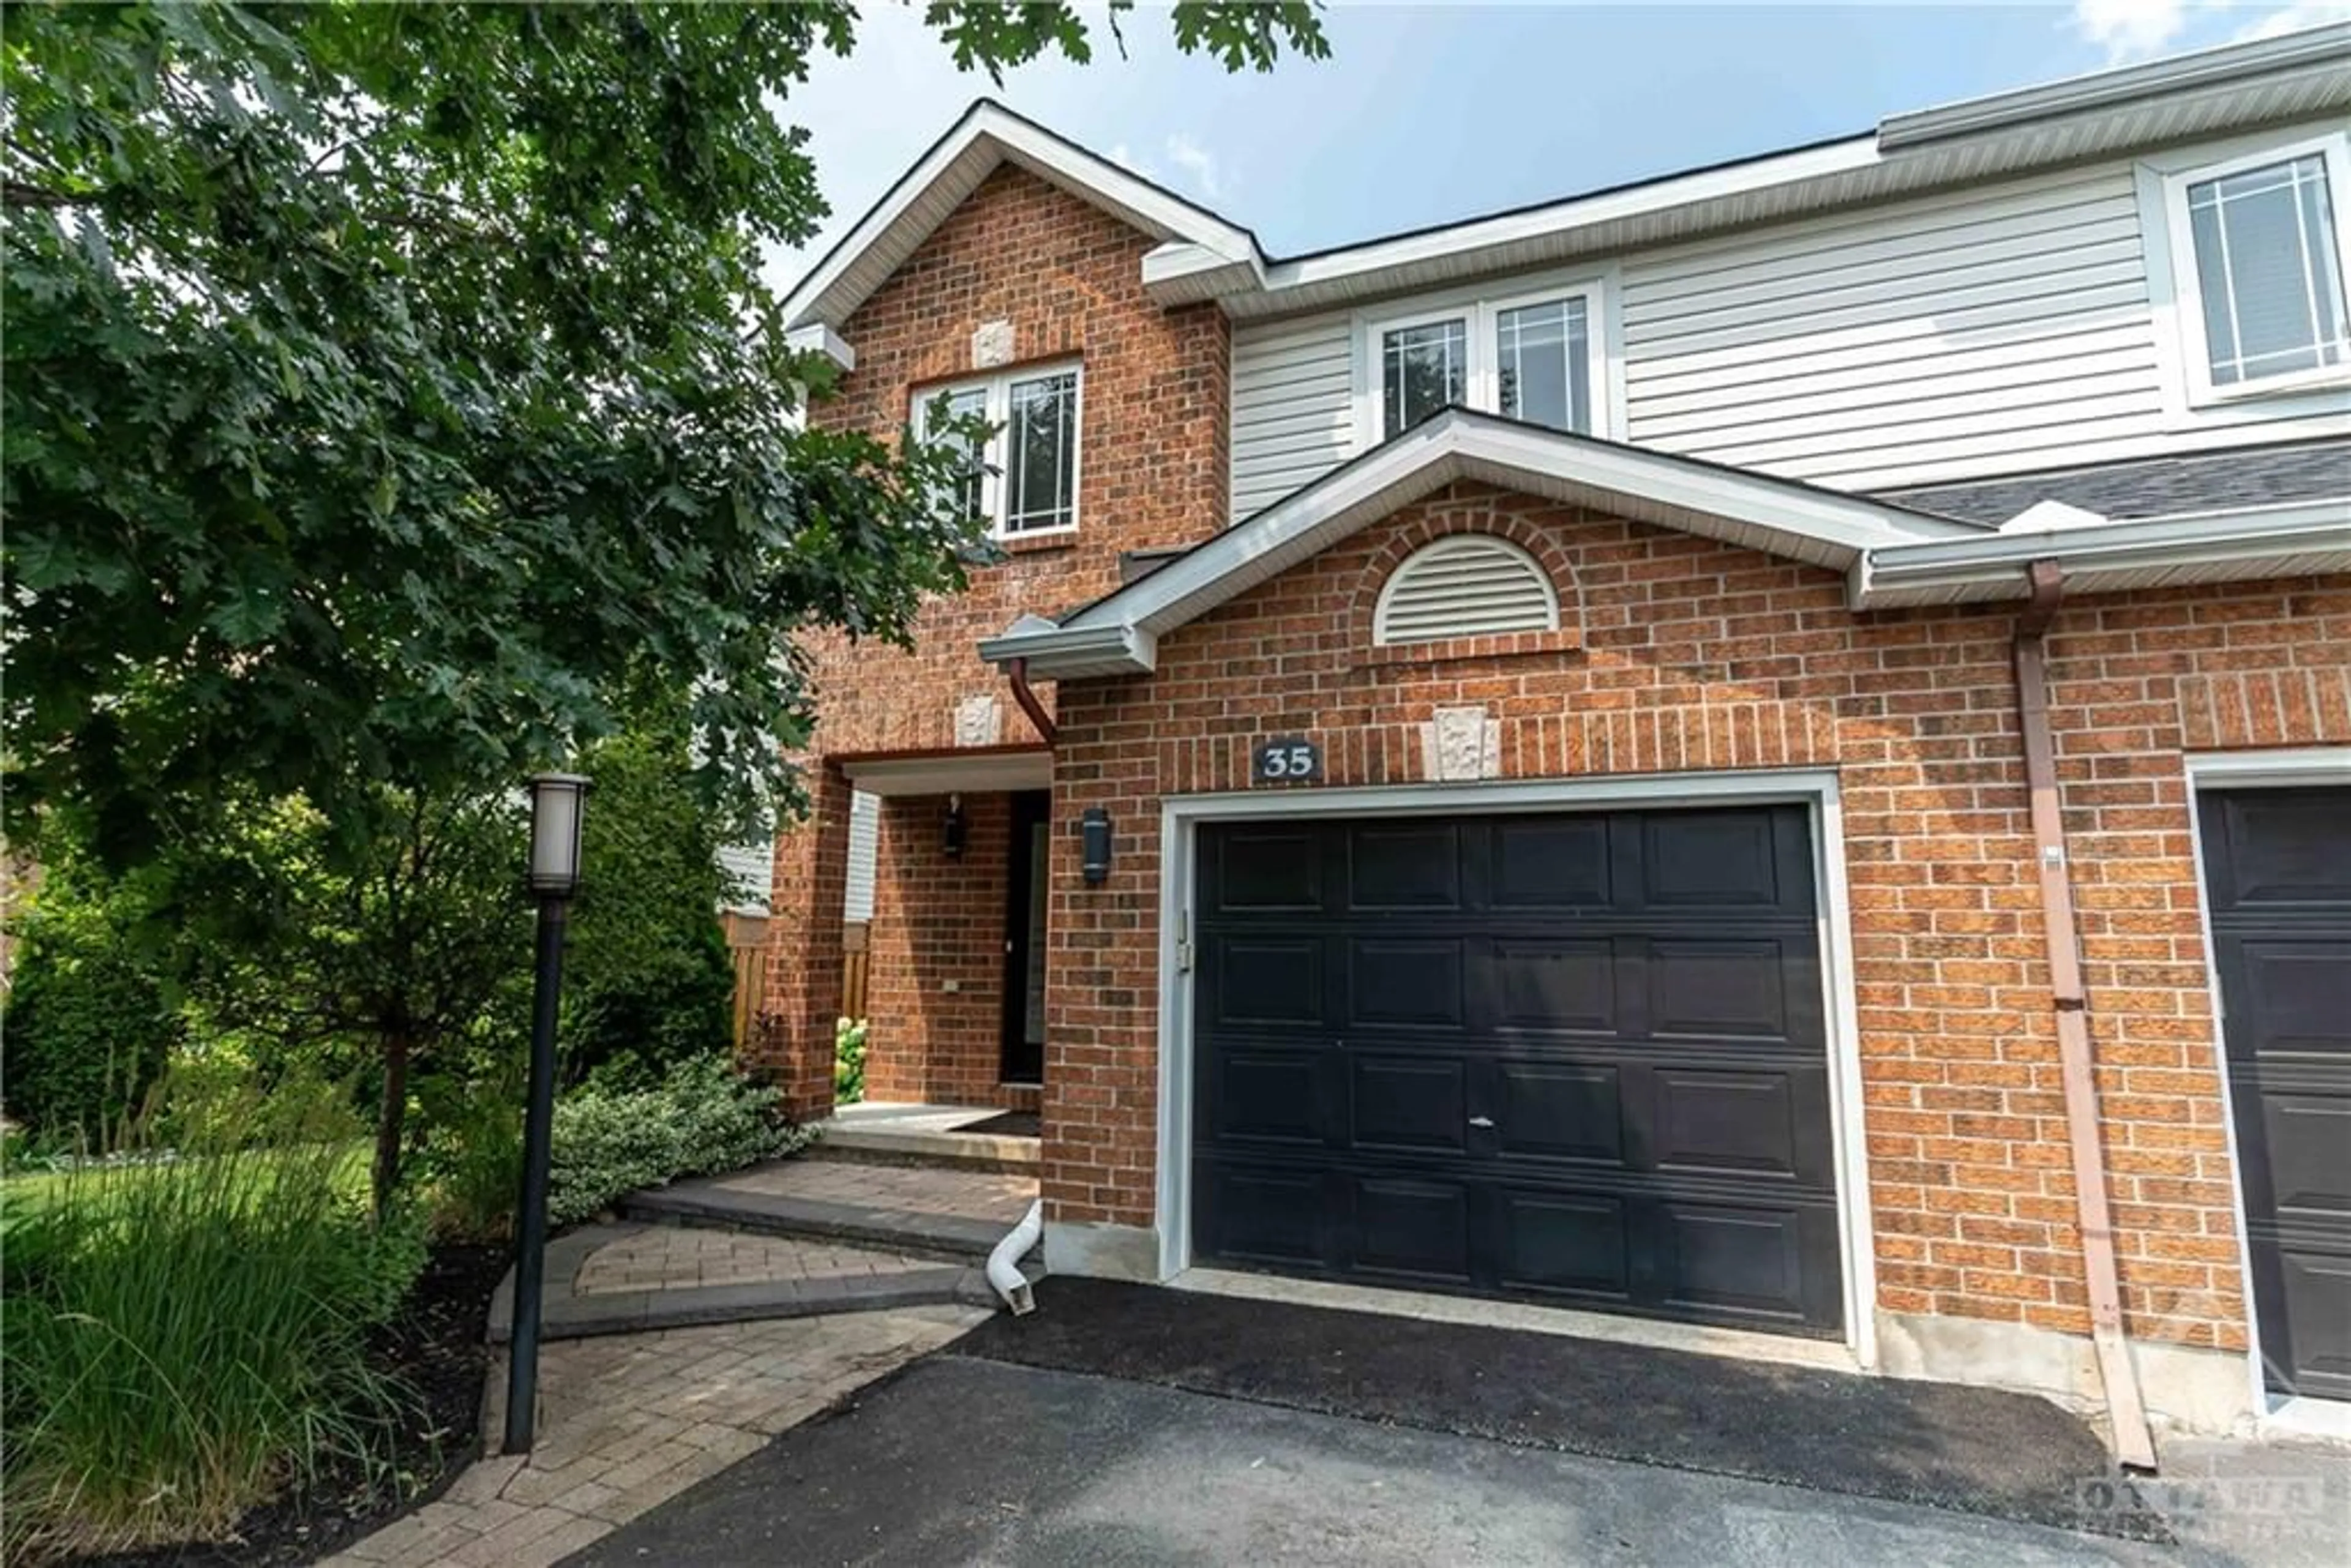 Home with brick exterior material for 35 ABACA Way, Stittsville Ontario K2S 2C4